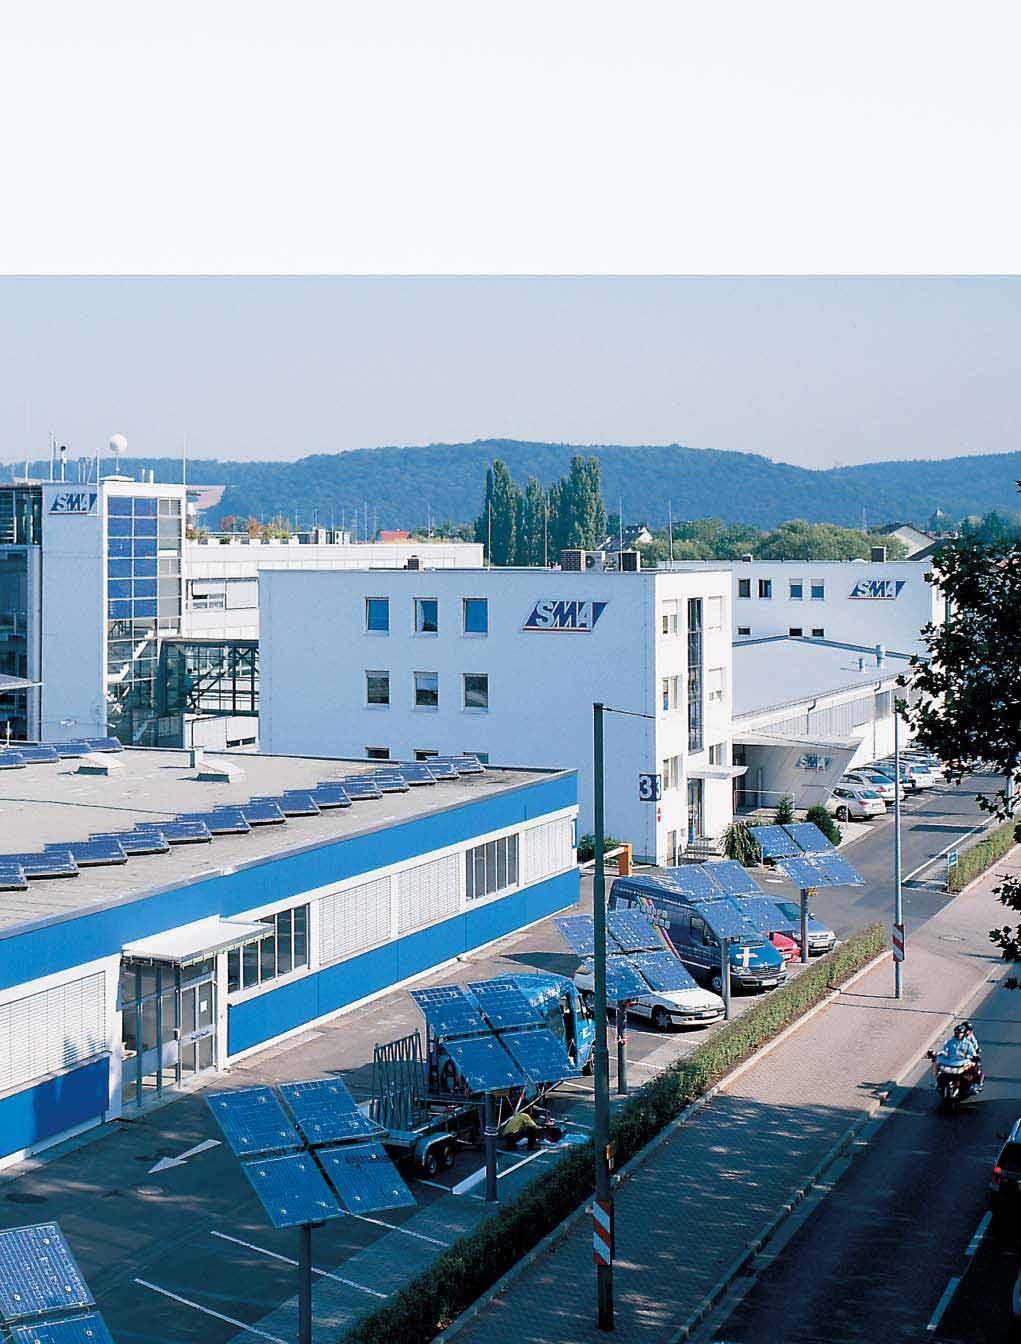 Market leader SMA has been developing and producing inverters for photovoltaic systems since 1981.